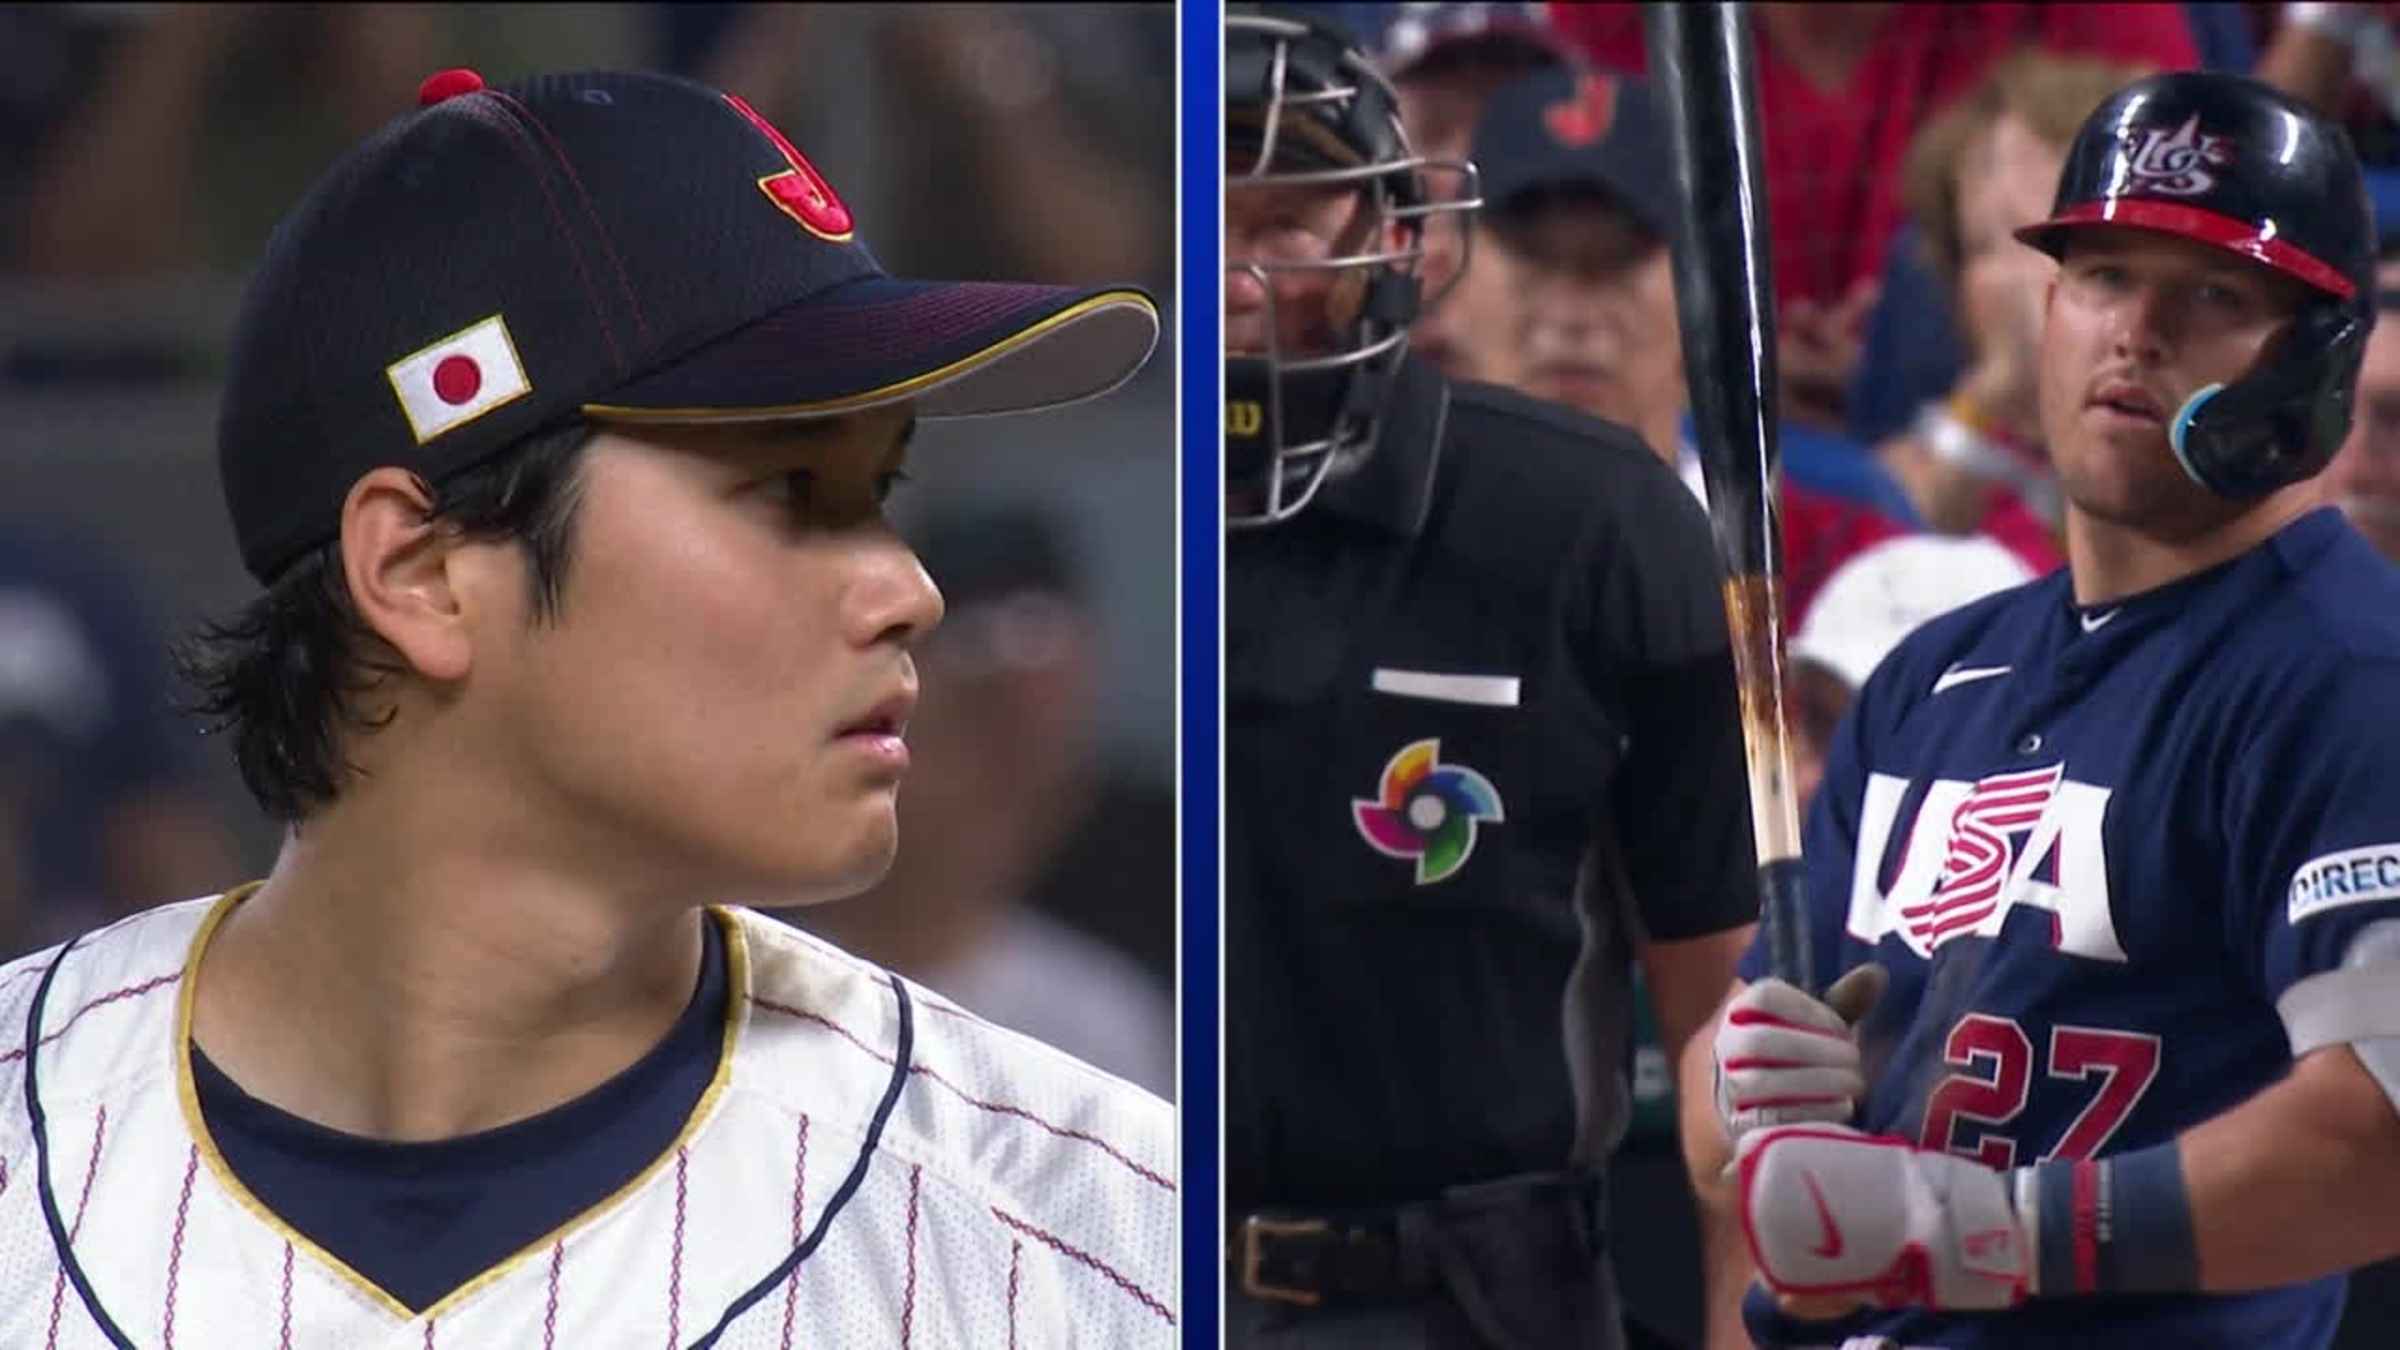 Shohei Ohtani vs. Mike Trout: Breaking down WBC's epic final at